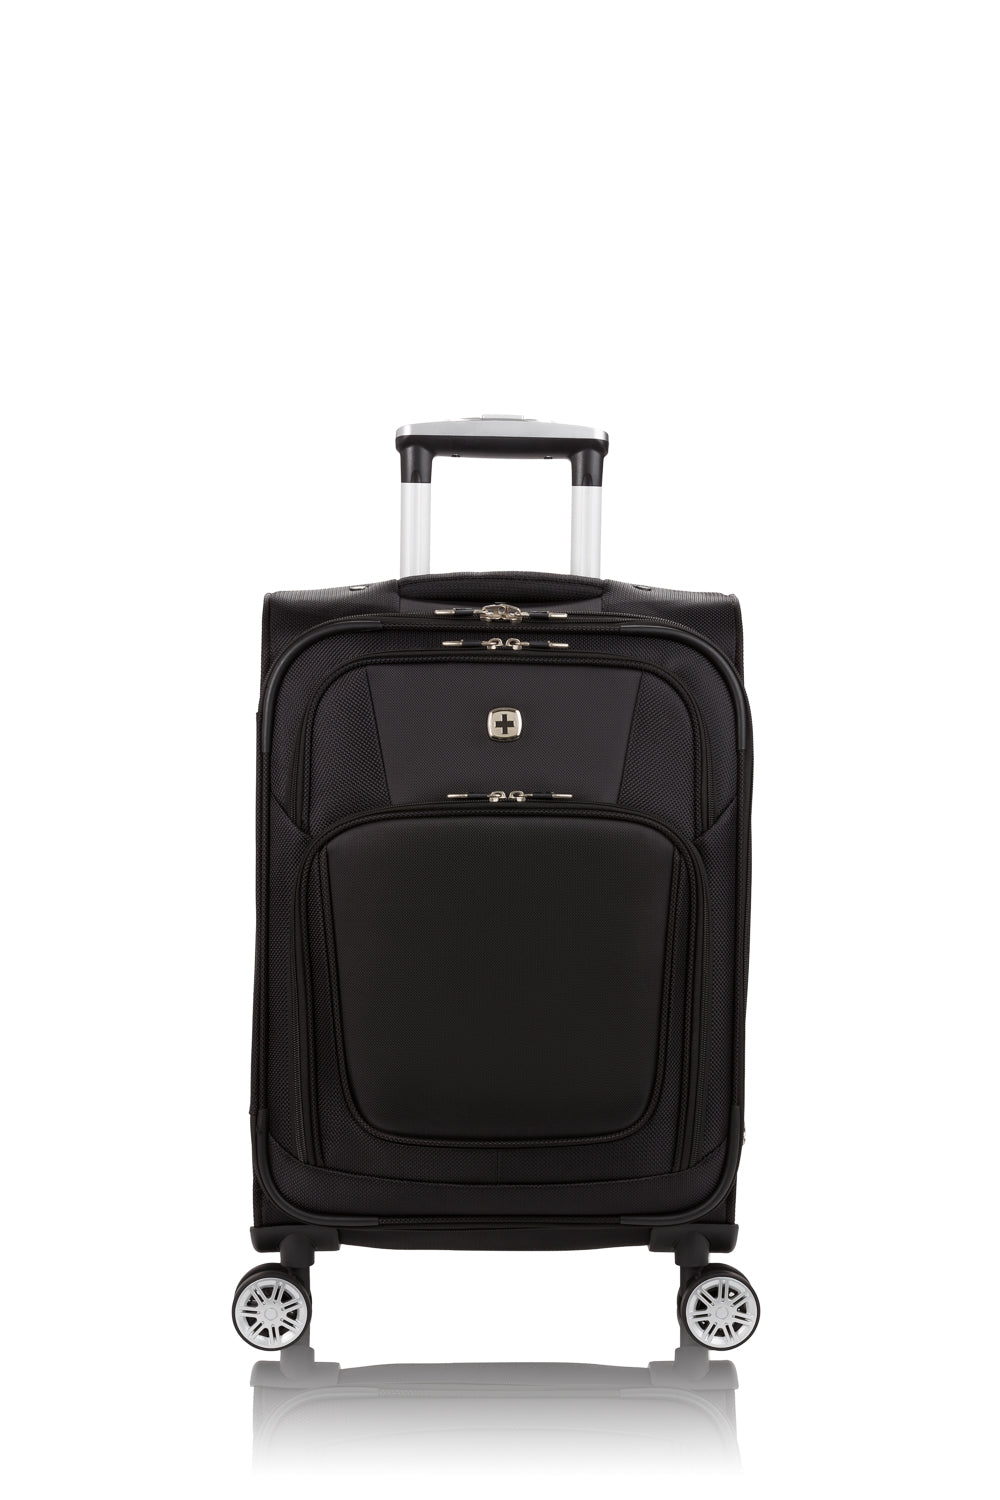 SwissGear 20in Spinner Carry-On Luggage